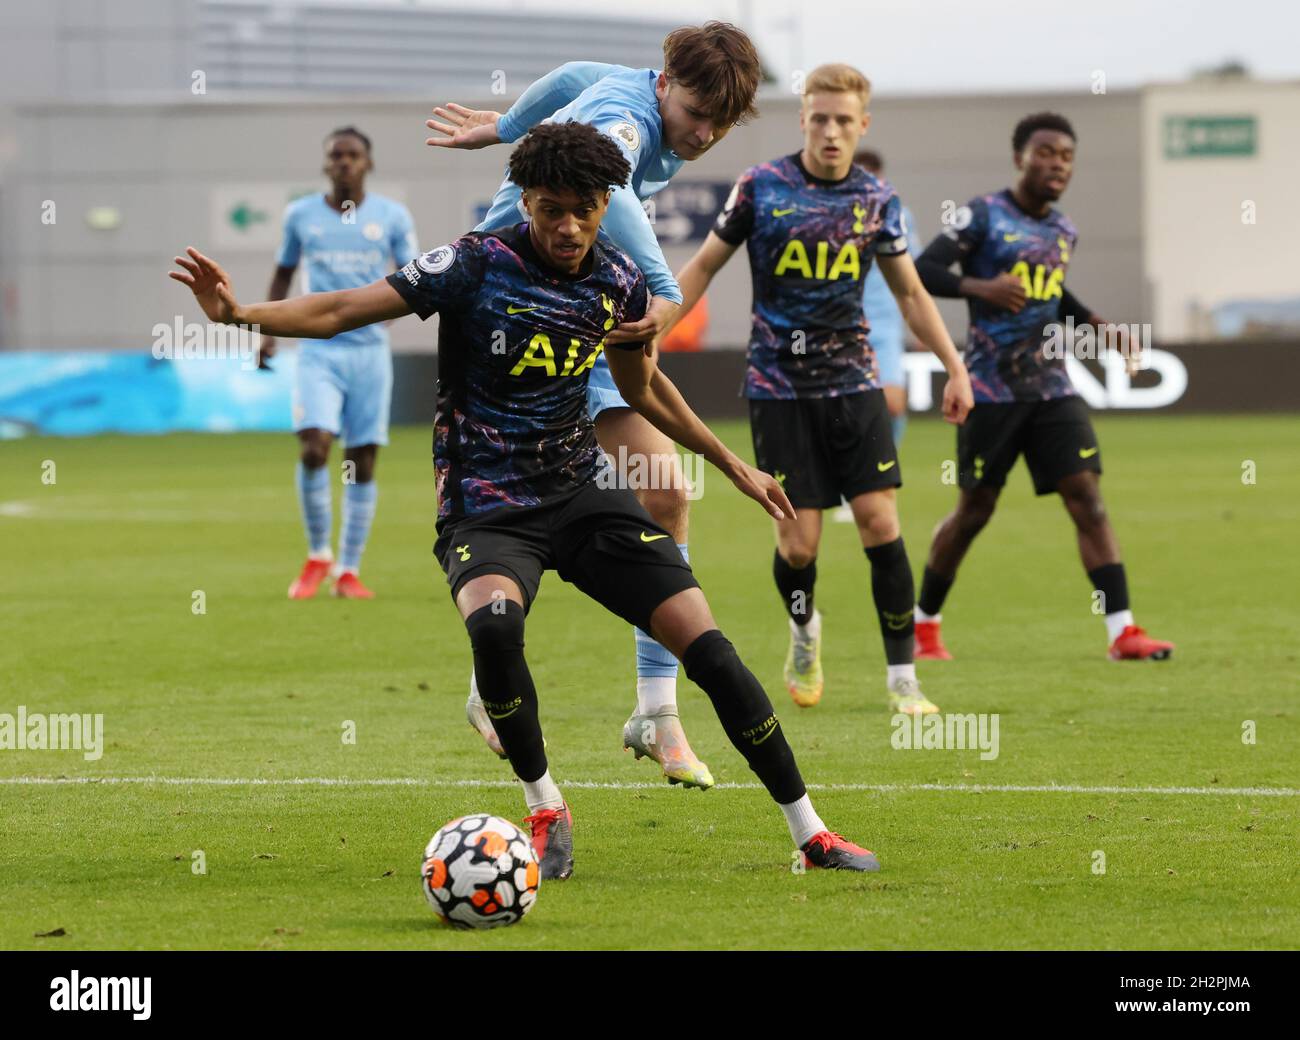 Manchester, England, 23rd October 2021.  Luca Barrington of Manchester City challenges Brooklyn Lyons-Foster of Tottenham during the Professional Development League match at the Academy Stadium, Manchester. Picture credit should read: Darren Staples / Sportimage Stock Photo